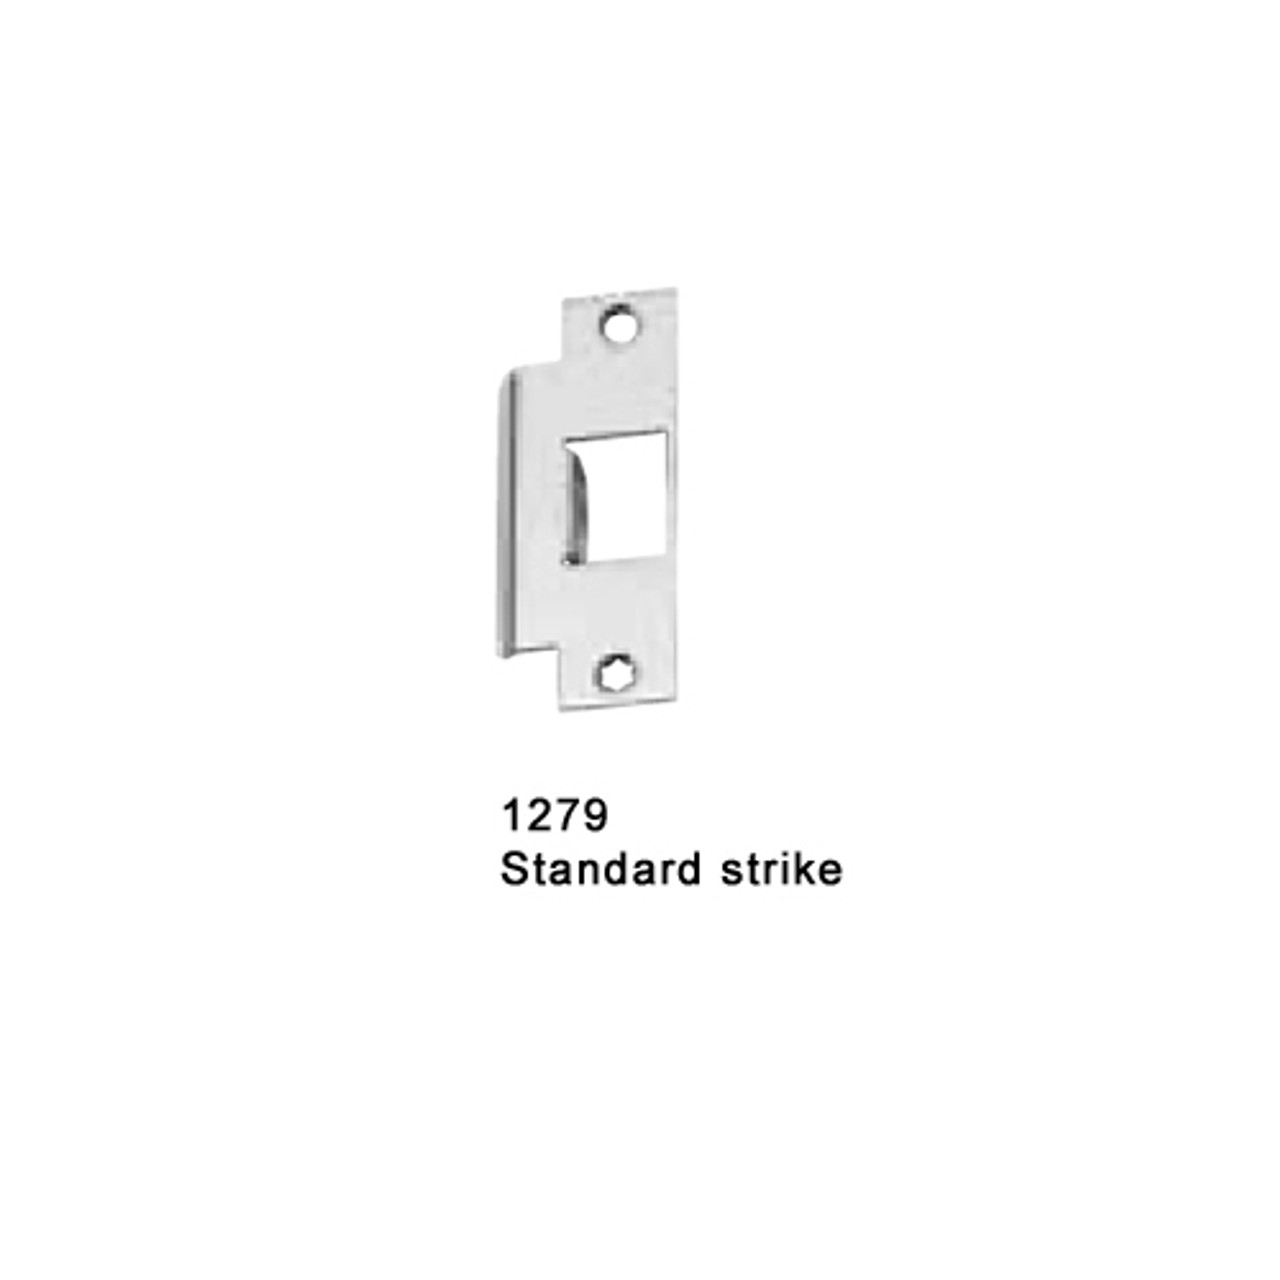 F-25-M-L-DT-Dane-US3-4-RHR Falcon 25 Series Fire Rated Mortise Lock Devices 510L-DT Dane Lever Trim with Dummy Trim in Polished Brass